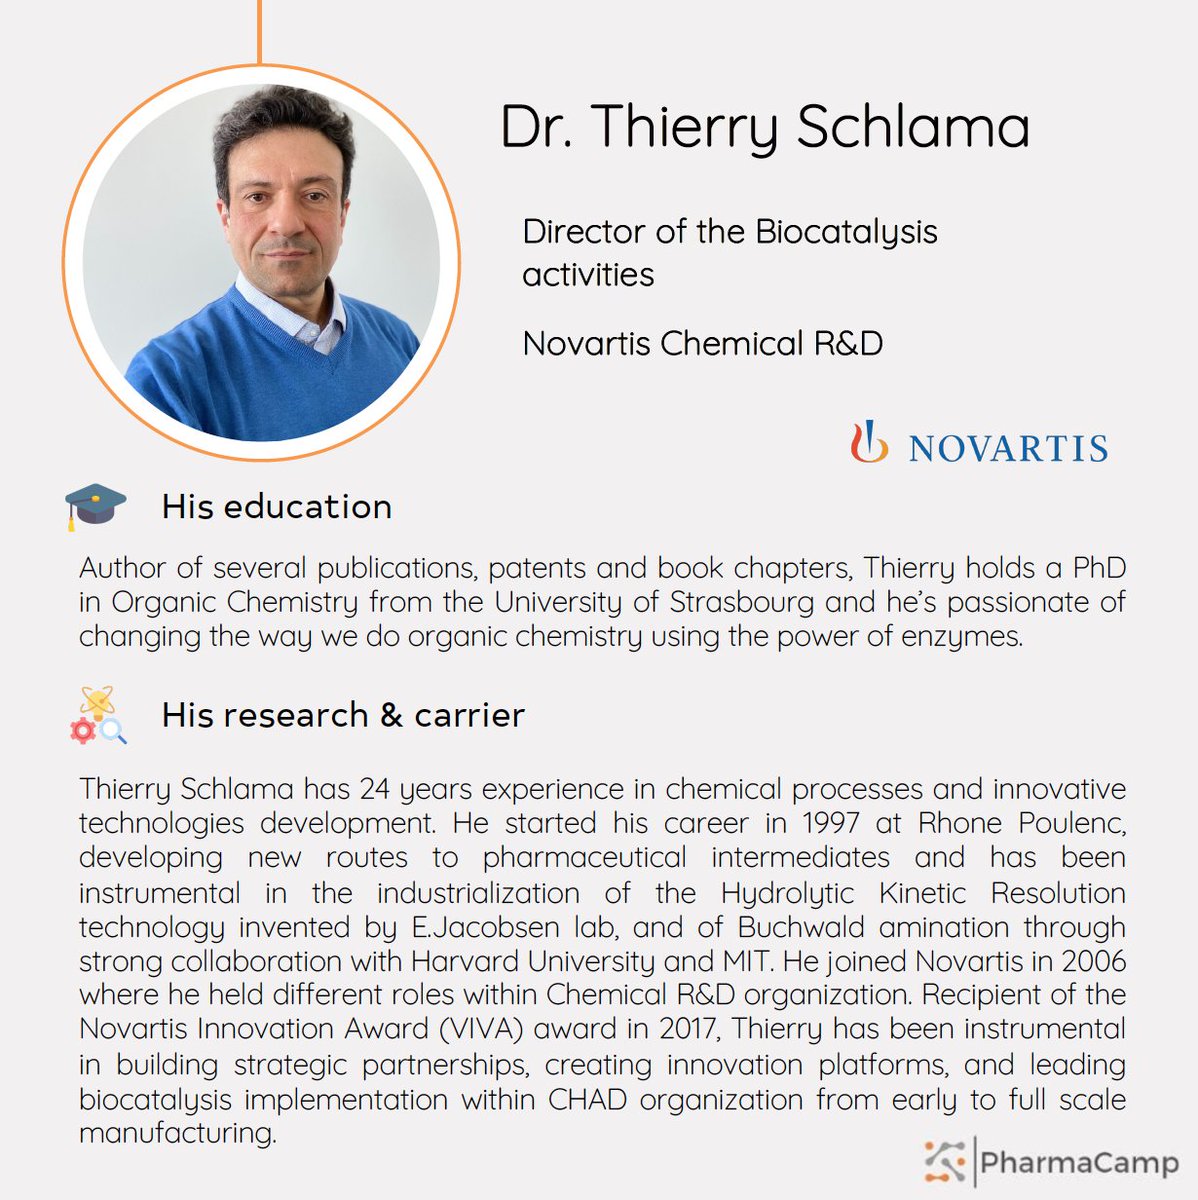 Pharmacamp 2023 will take place in Bern in September. Meet our speakers ! Fourth on is Dr. Thierry Schlama, Director of the Biocatalysis activities at Novartis ! We are looking forward to listen to his talk ! #pharmacamp #unibe #biocatalysis #precisionmedicine #digitalisation